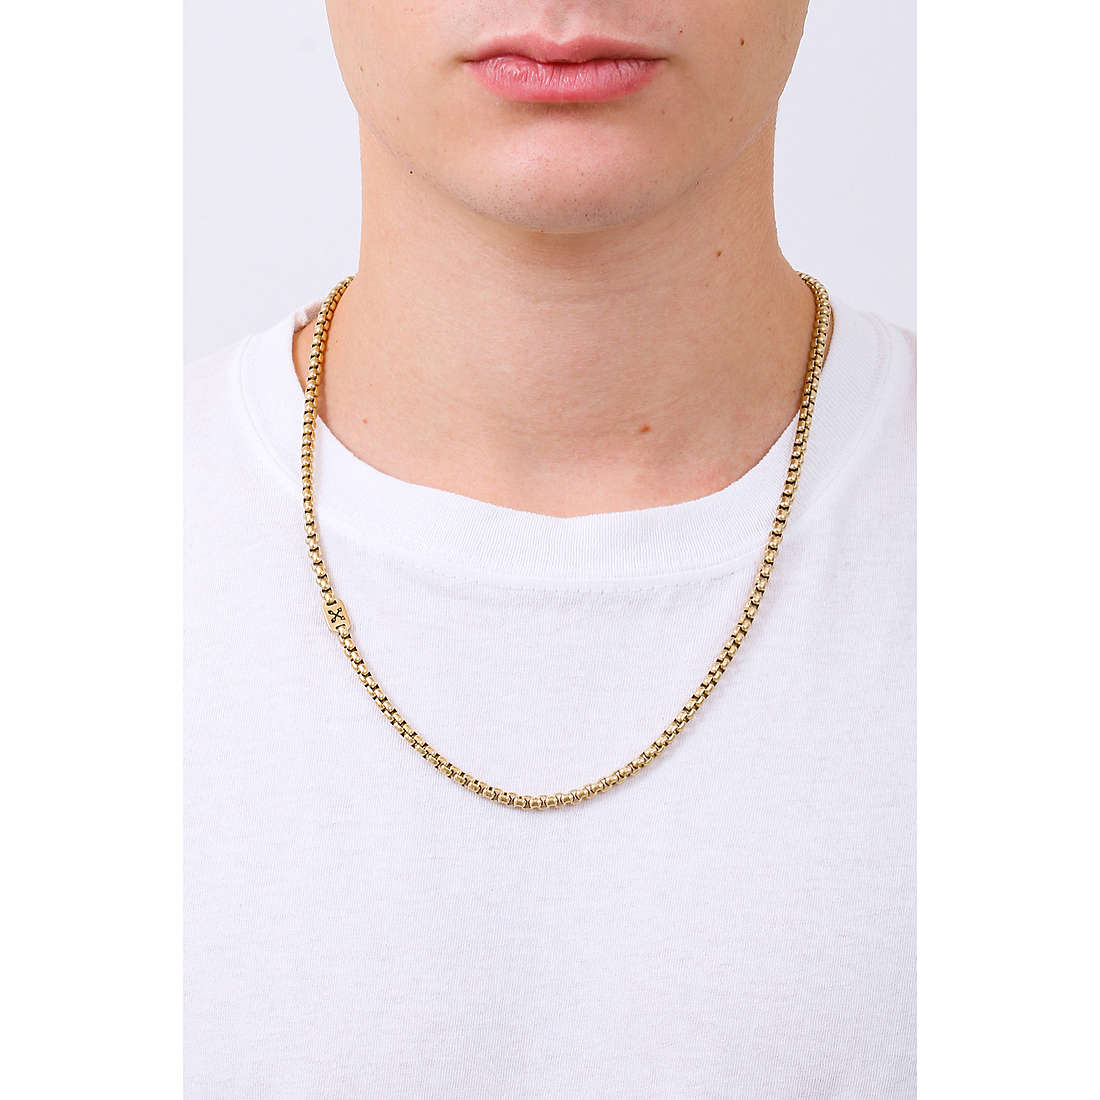 Fossil necklaces Jewelry man JF04337710 wearing